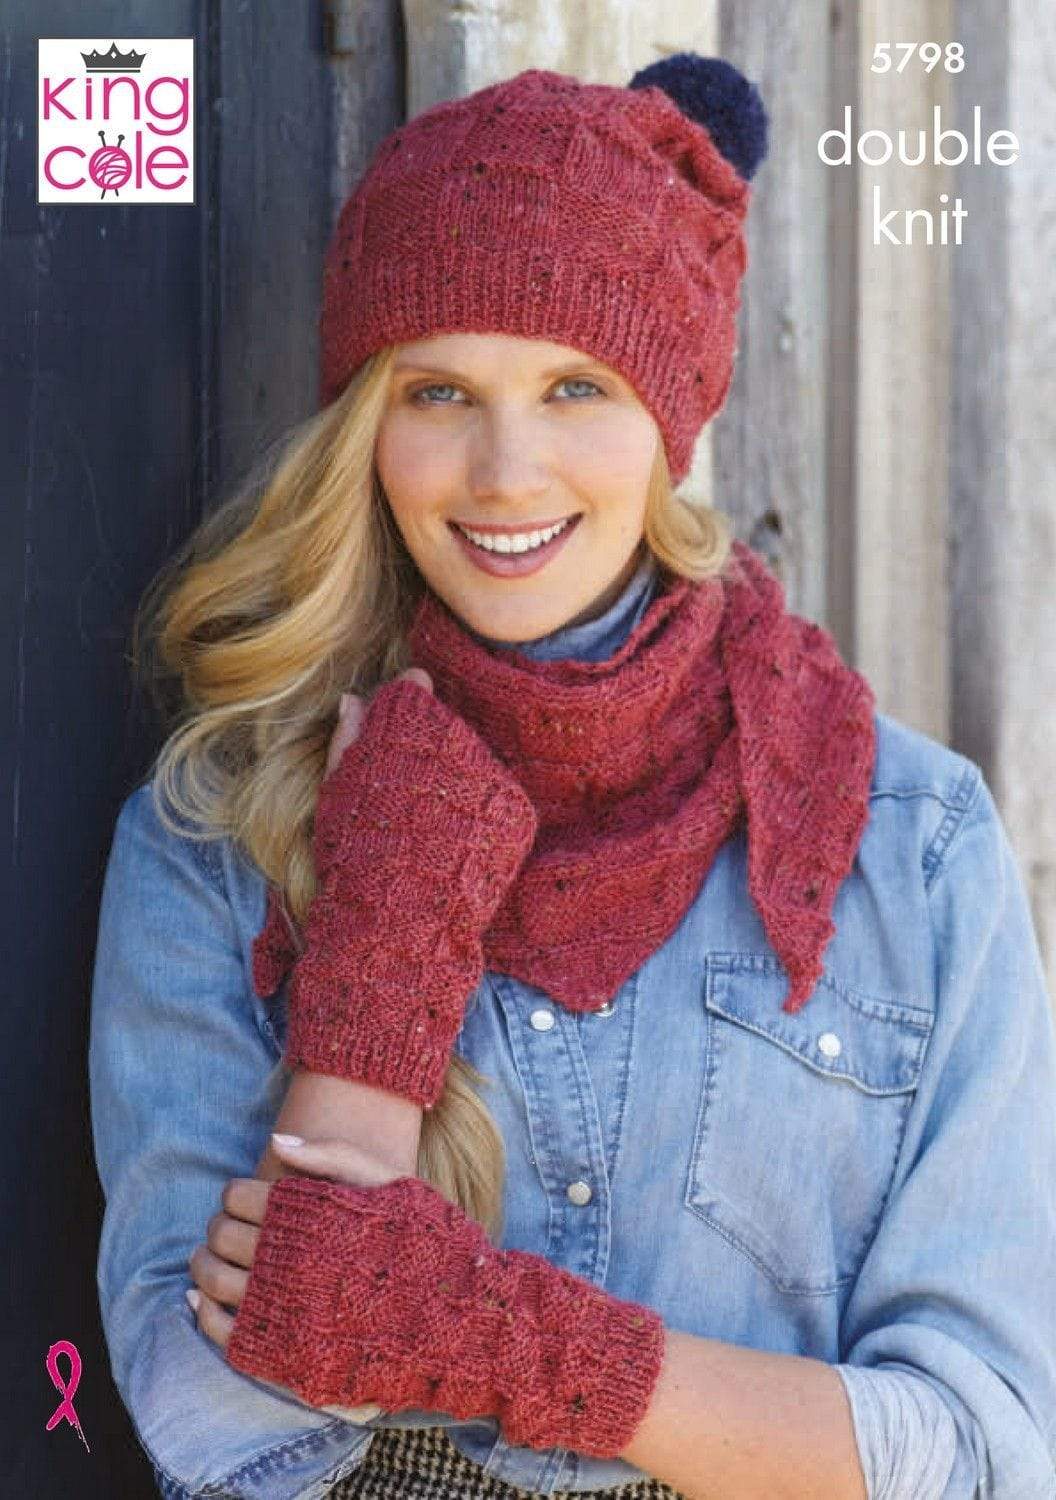 King Cole Patterns King Cole Homespun DK - Accessories (5798) 5057886025264